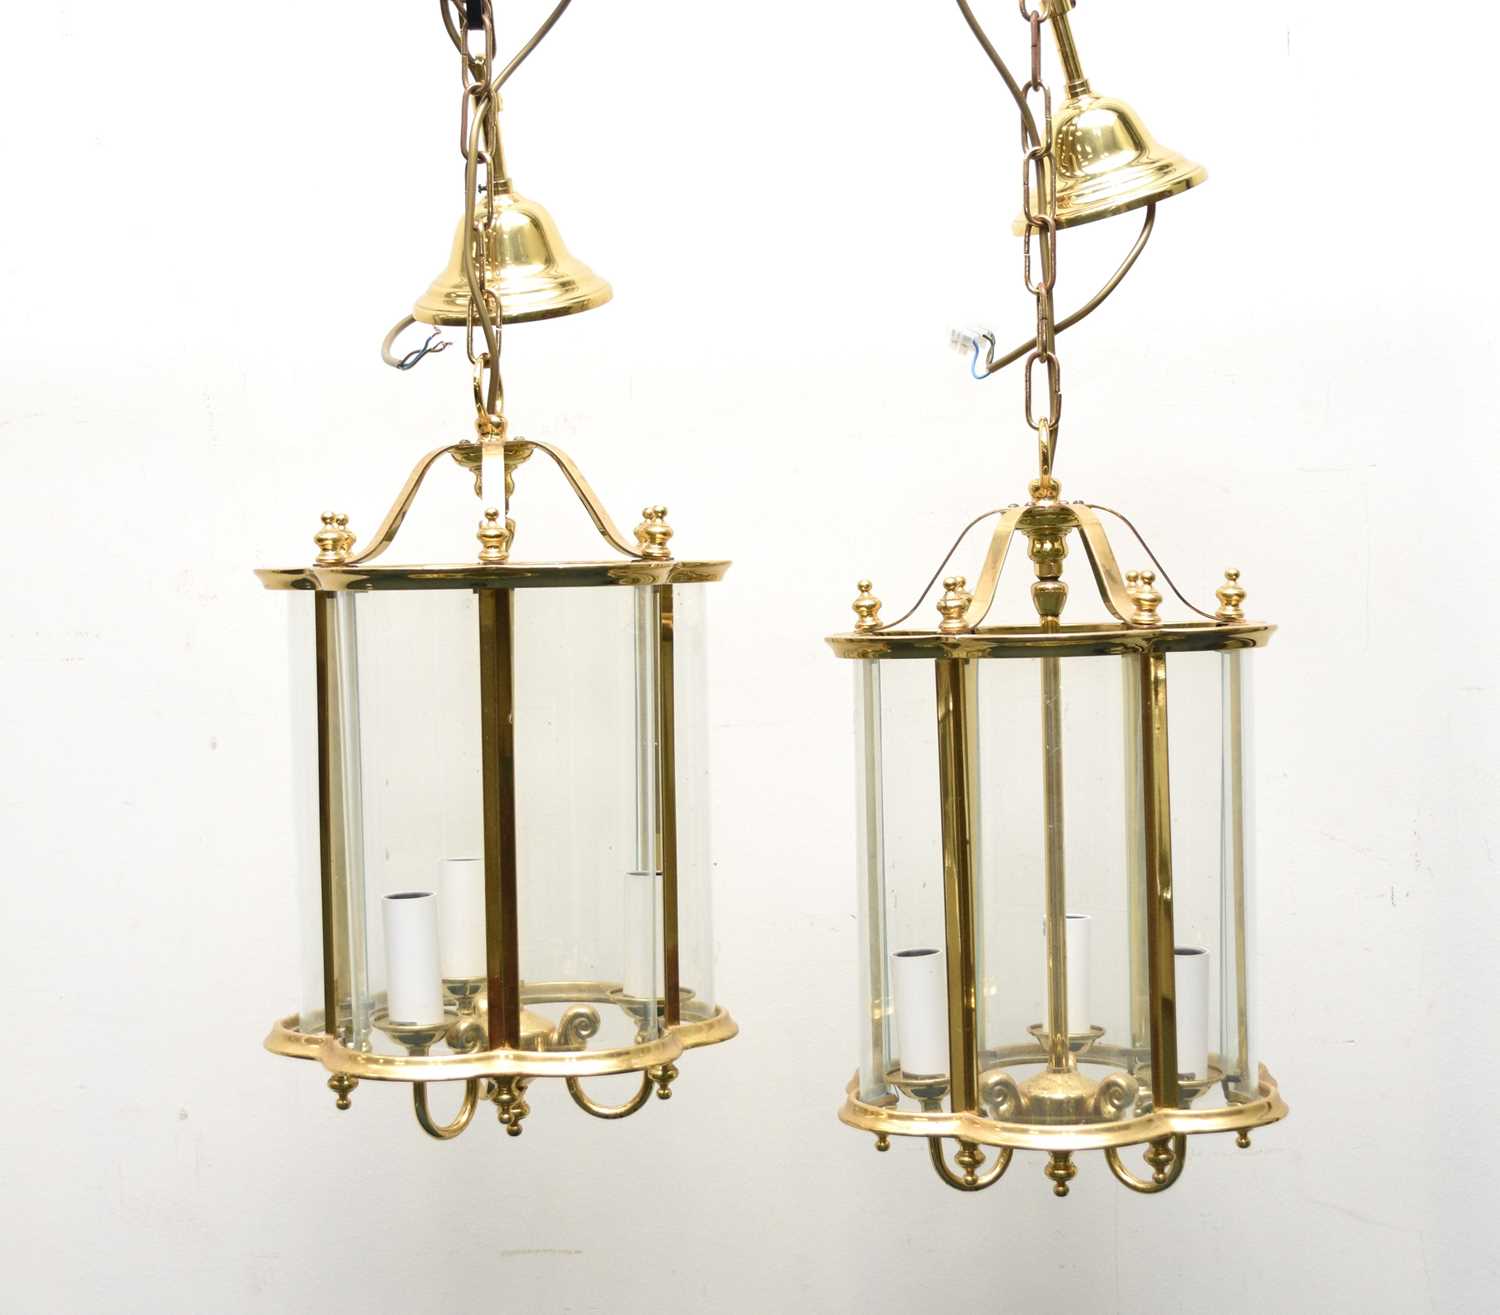 A pair of reproduction brass and glass lantern ceiling lights